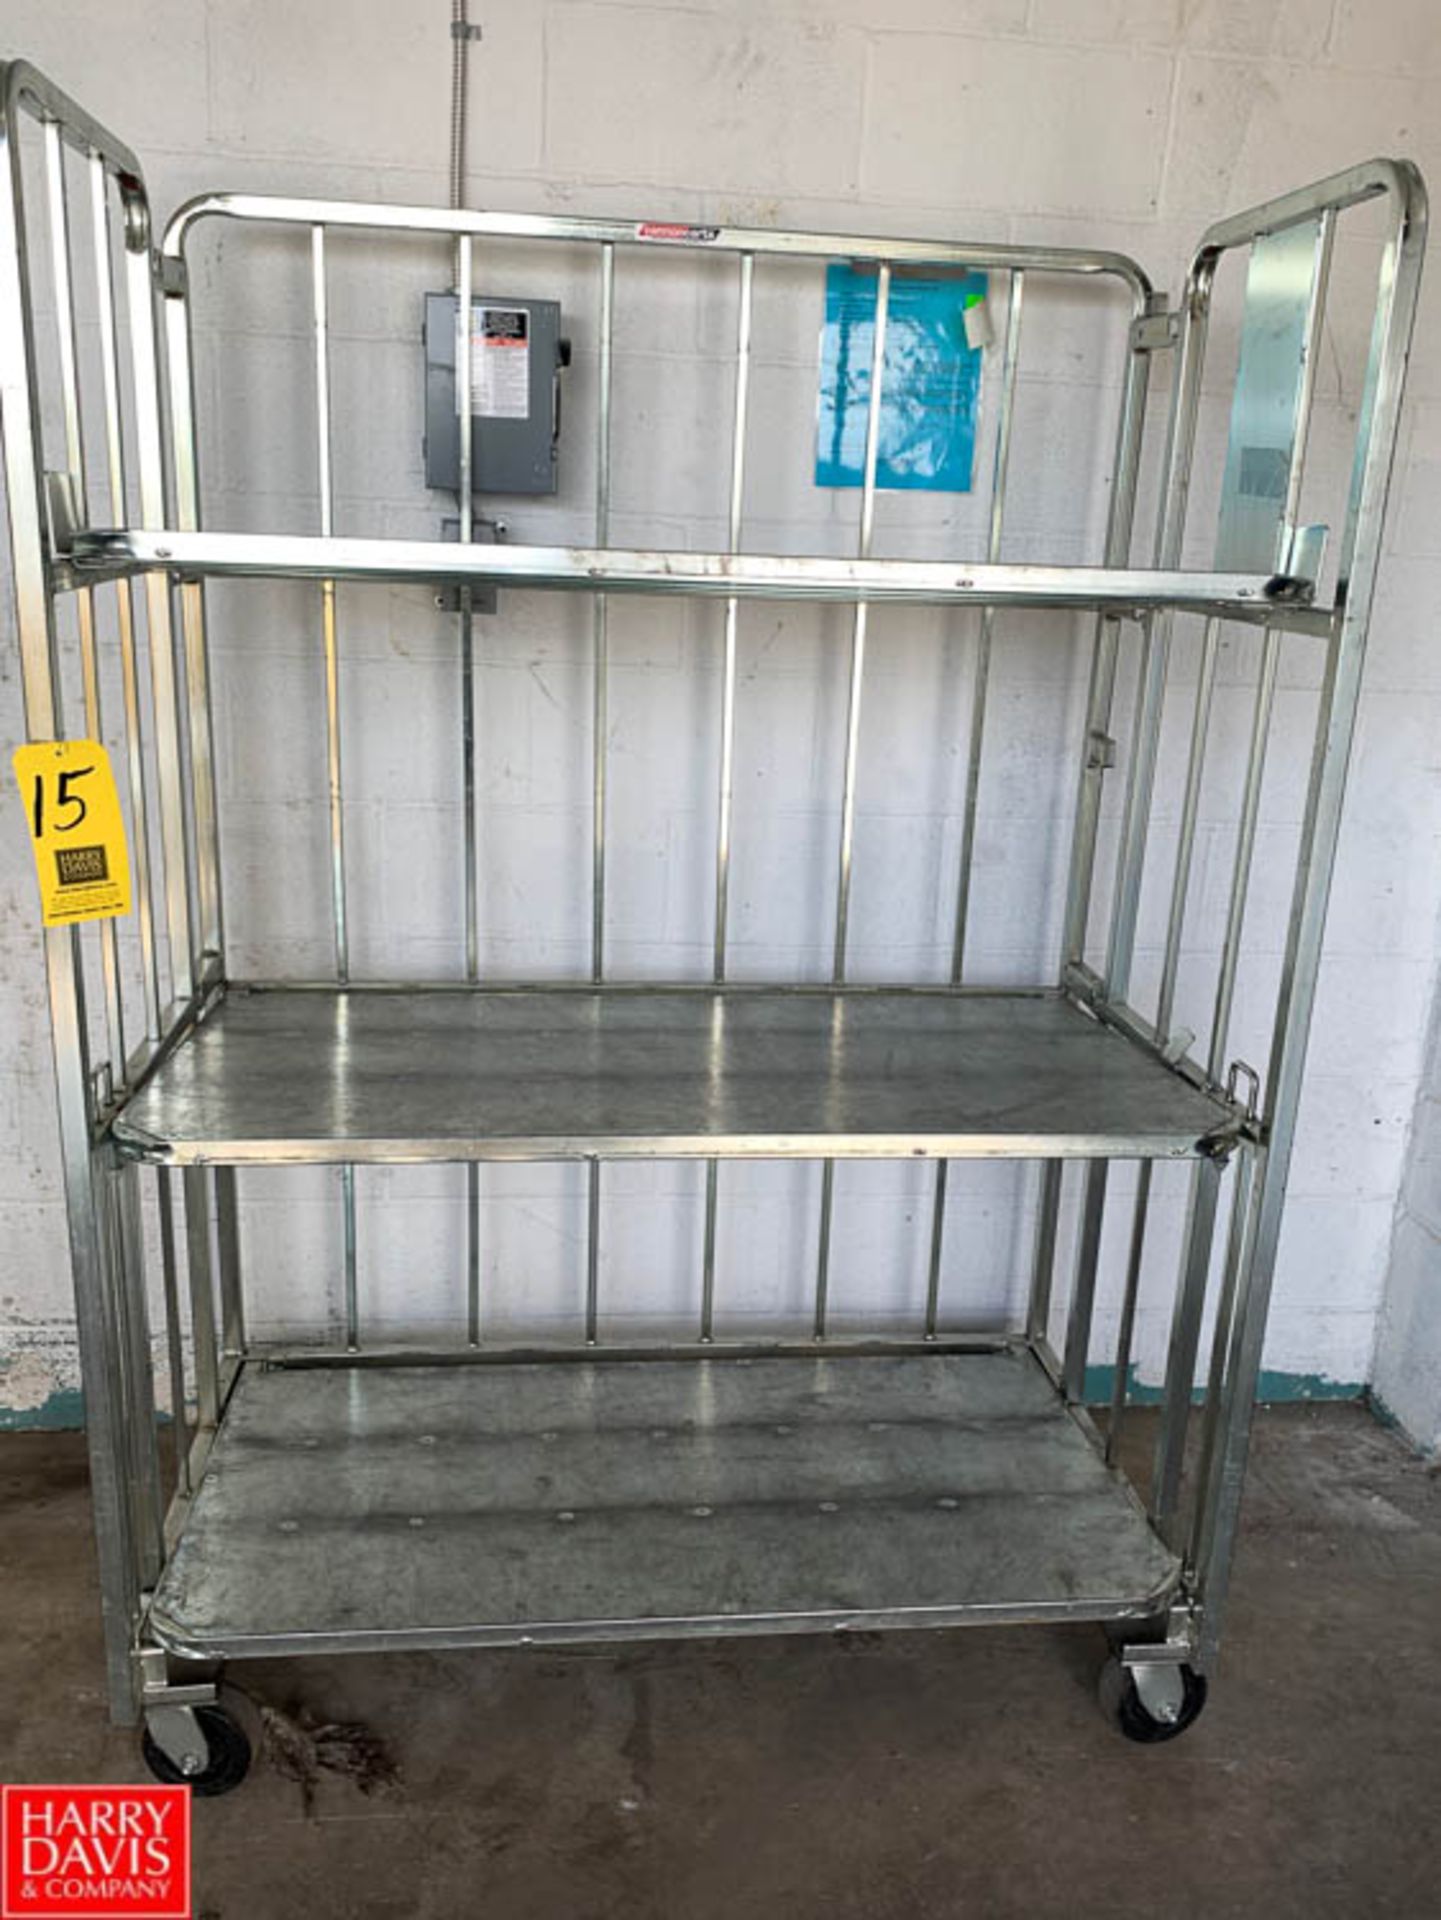 Cannon 84 Gallon S/S Bossy Cart, Model 4-13MM83-0263-300 - Rigging Fee: $10